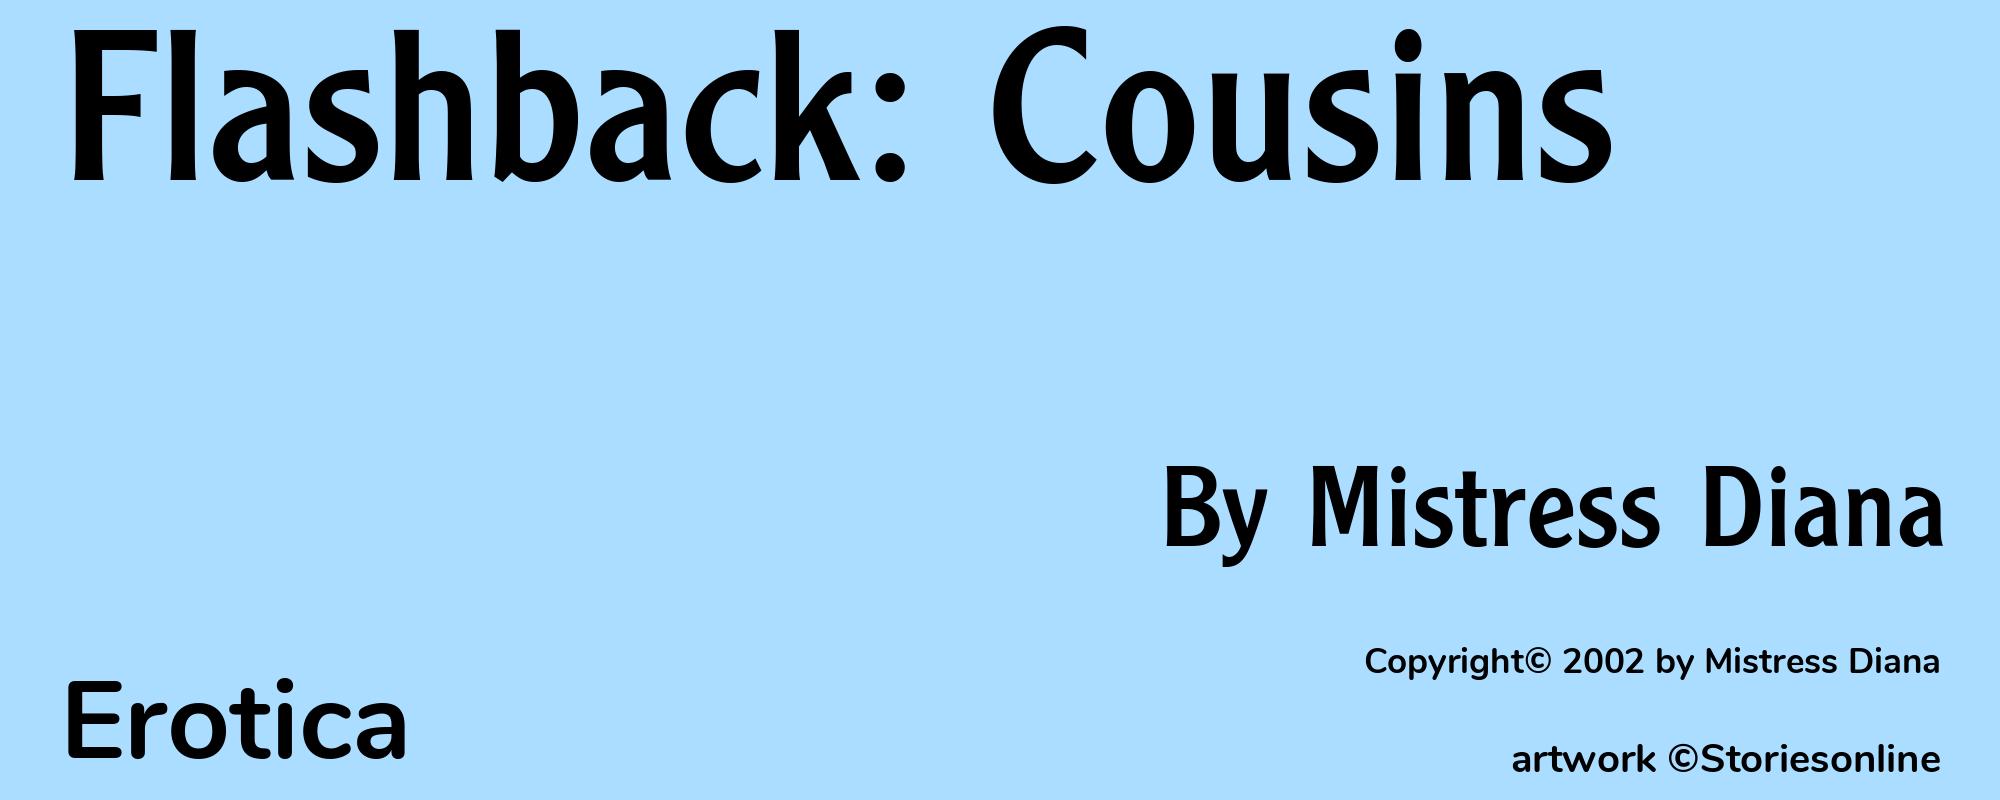 Flashback: Cousins - Cover